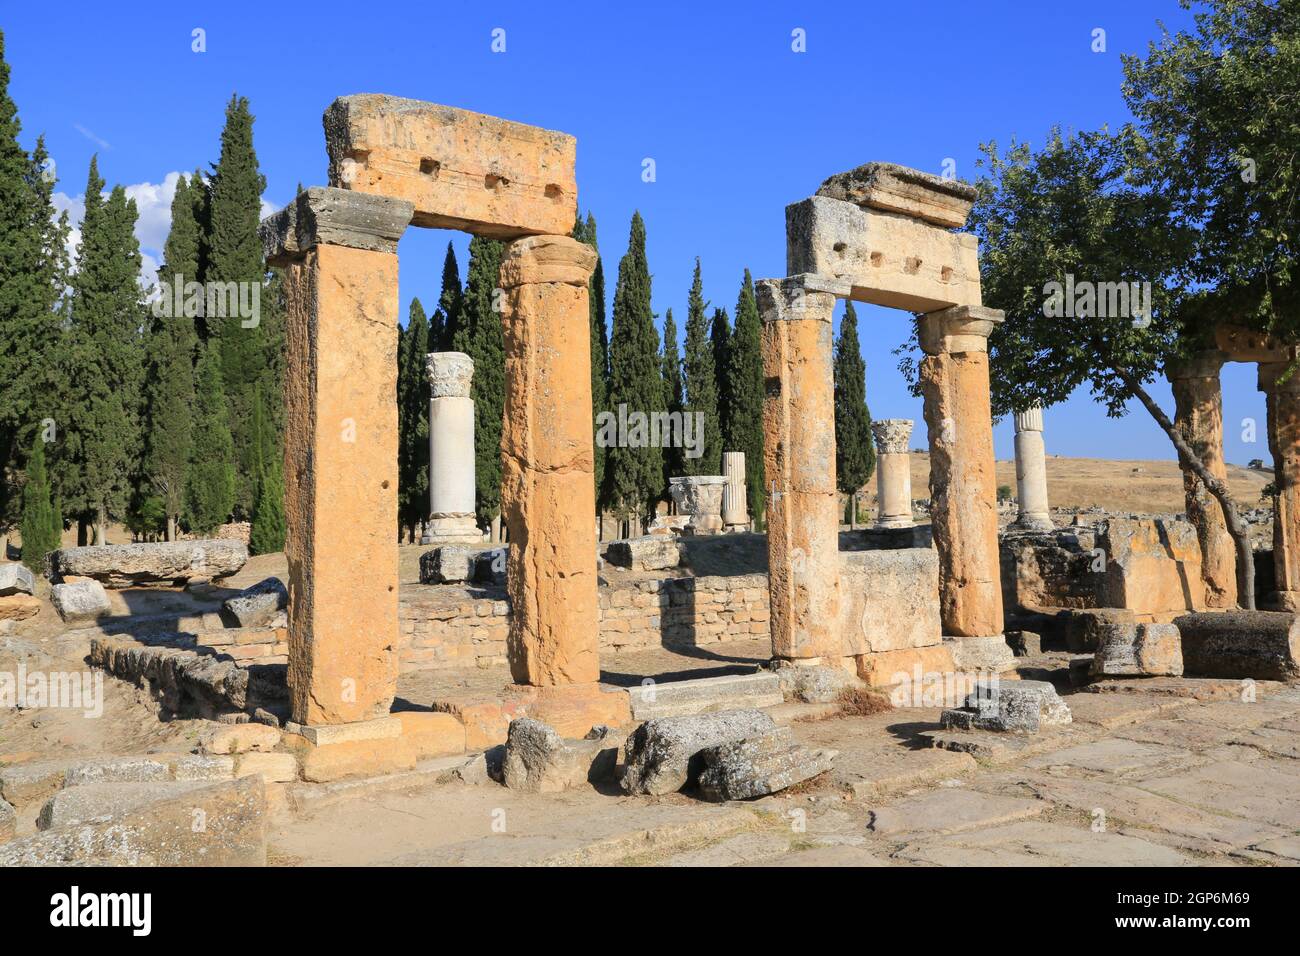 Columns by the latrine at the ancient spa city of Hierapolis date from 190 BC and are near the travertine terraces of Pamukkale in Western Turkey. Stock Photo